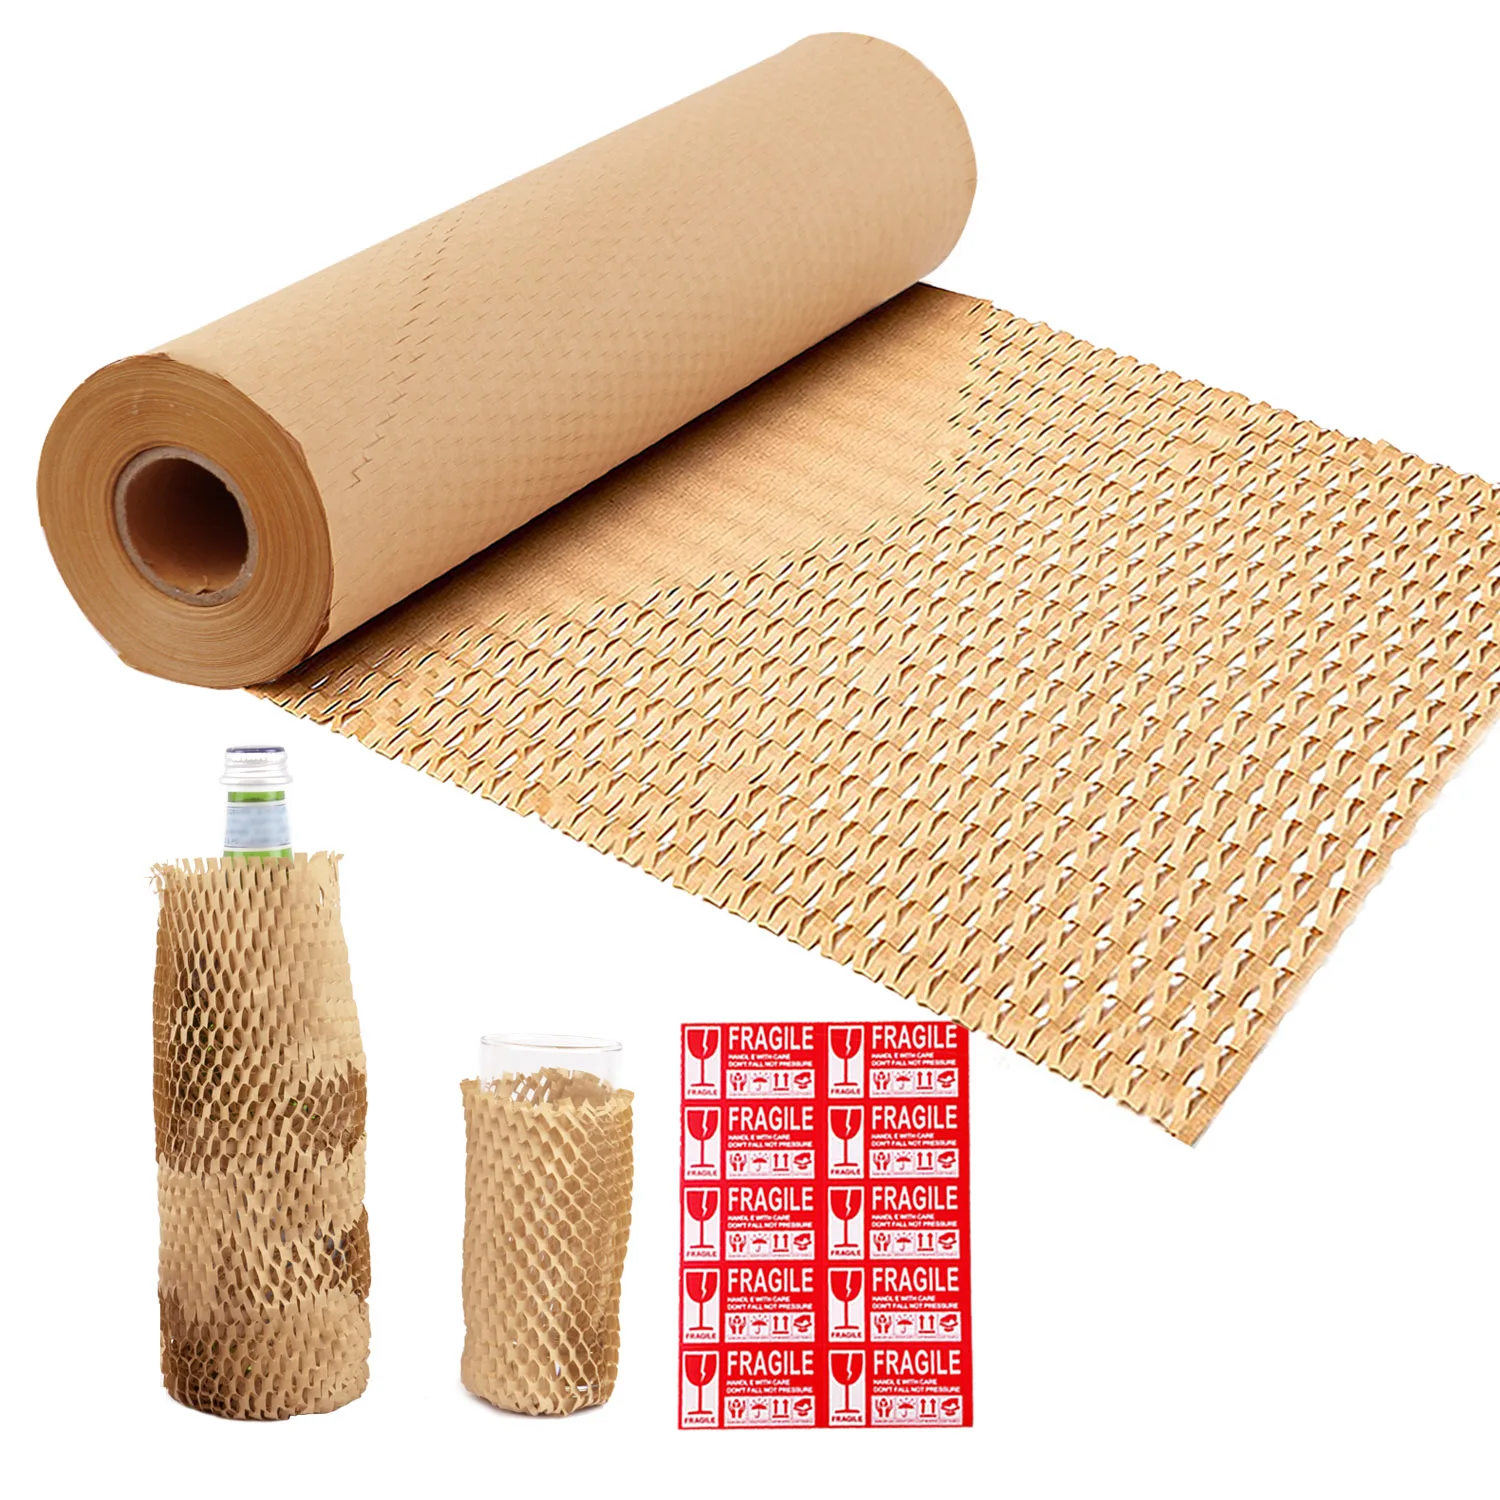 Honeycomb Packing Paper Wrap for Moving Shipping with 20 Fragile